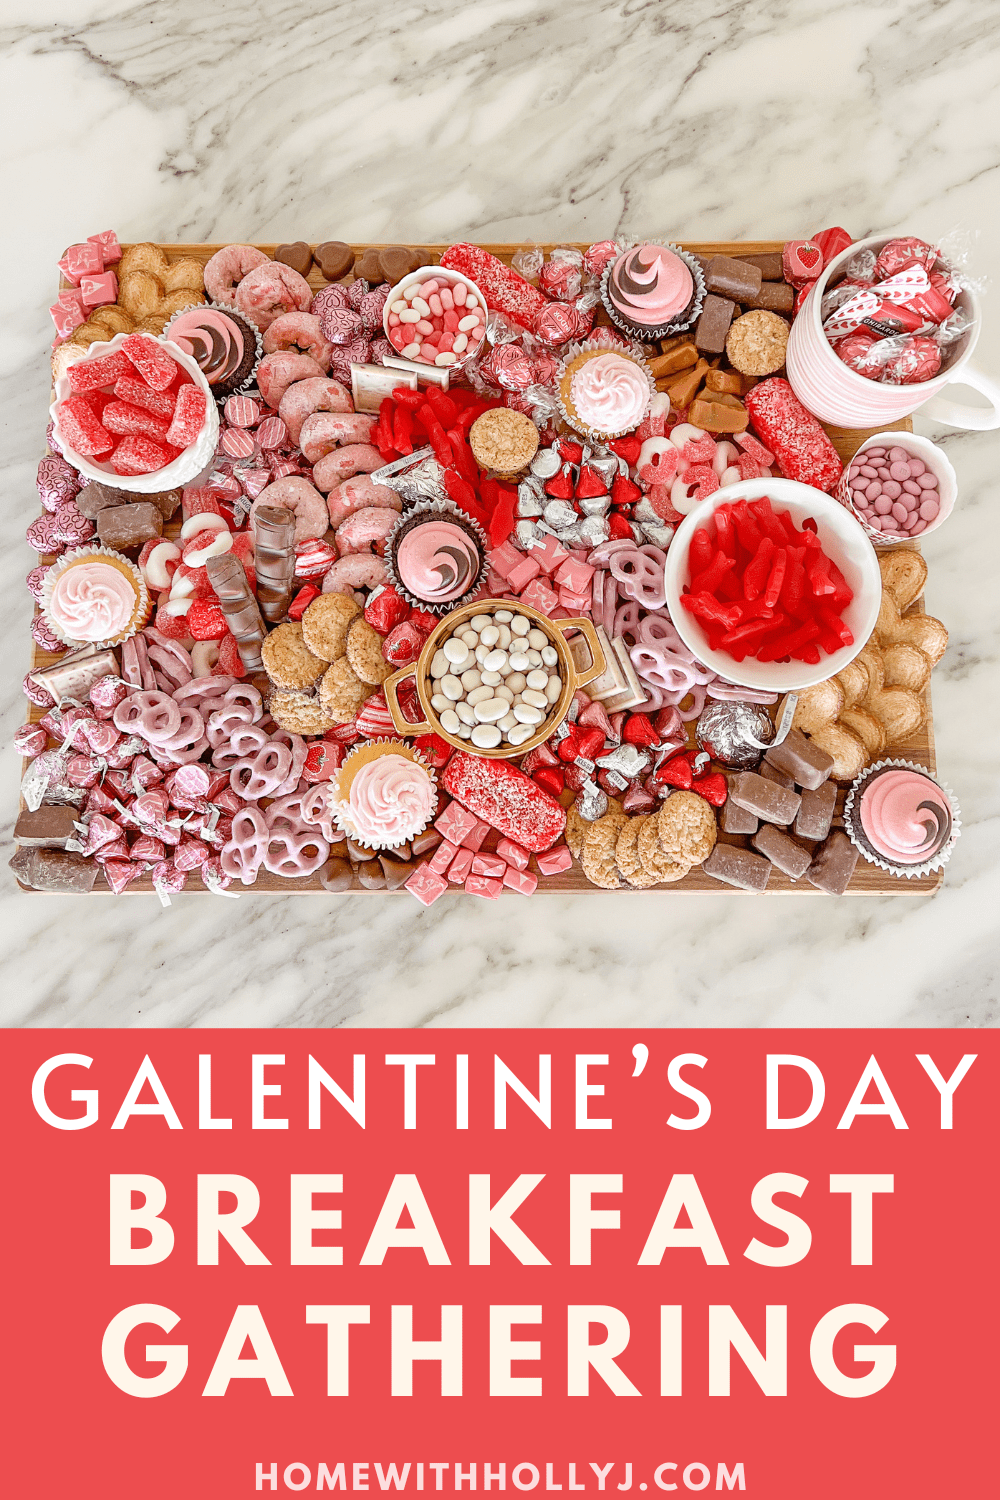 Make lasting memories with your family with a Galentine's Day breakfast gathering. Celebrate multiple generations with love, crafts, and treats.